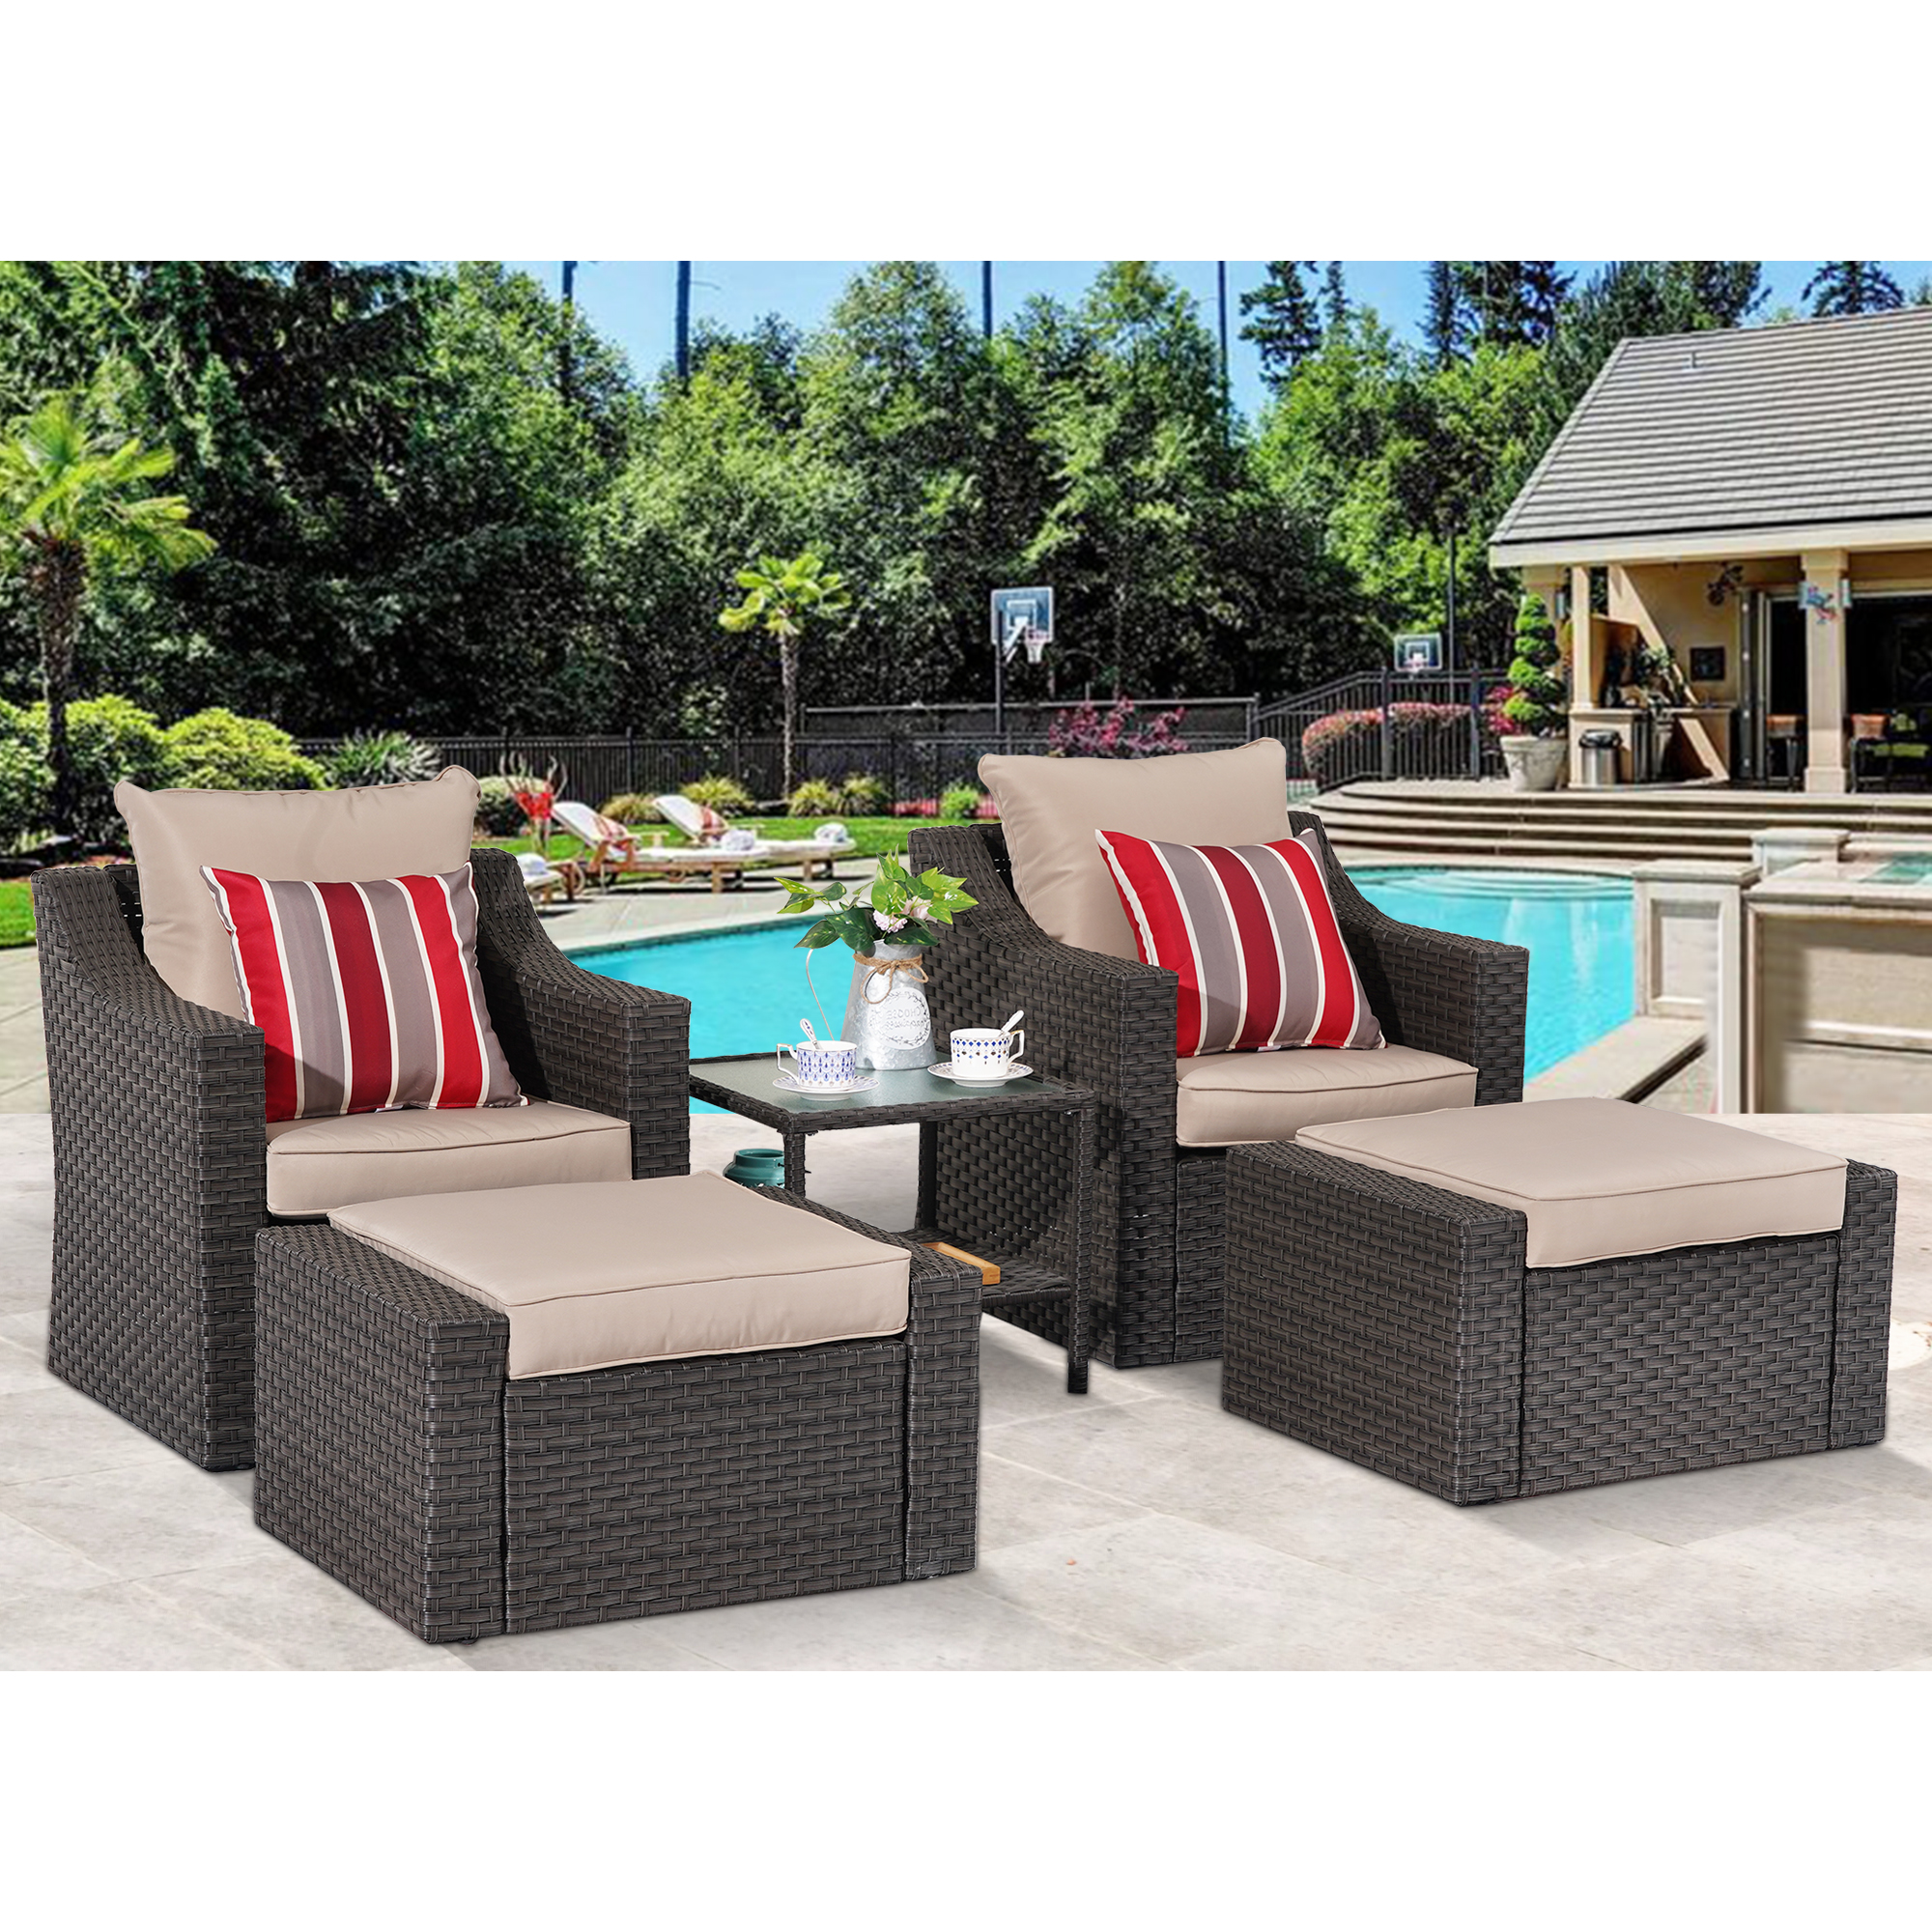 Superjoe 5 Pcs Patio Furniture Sets Outdoor Wicker Lounge Chair with Ottomans and Coffee Table, Khaki - image 1 of 6